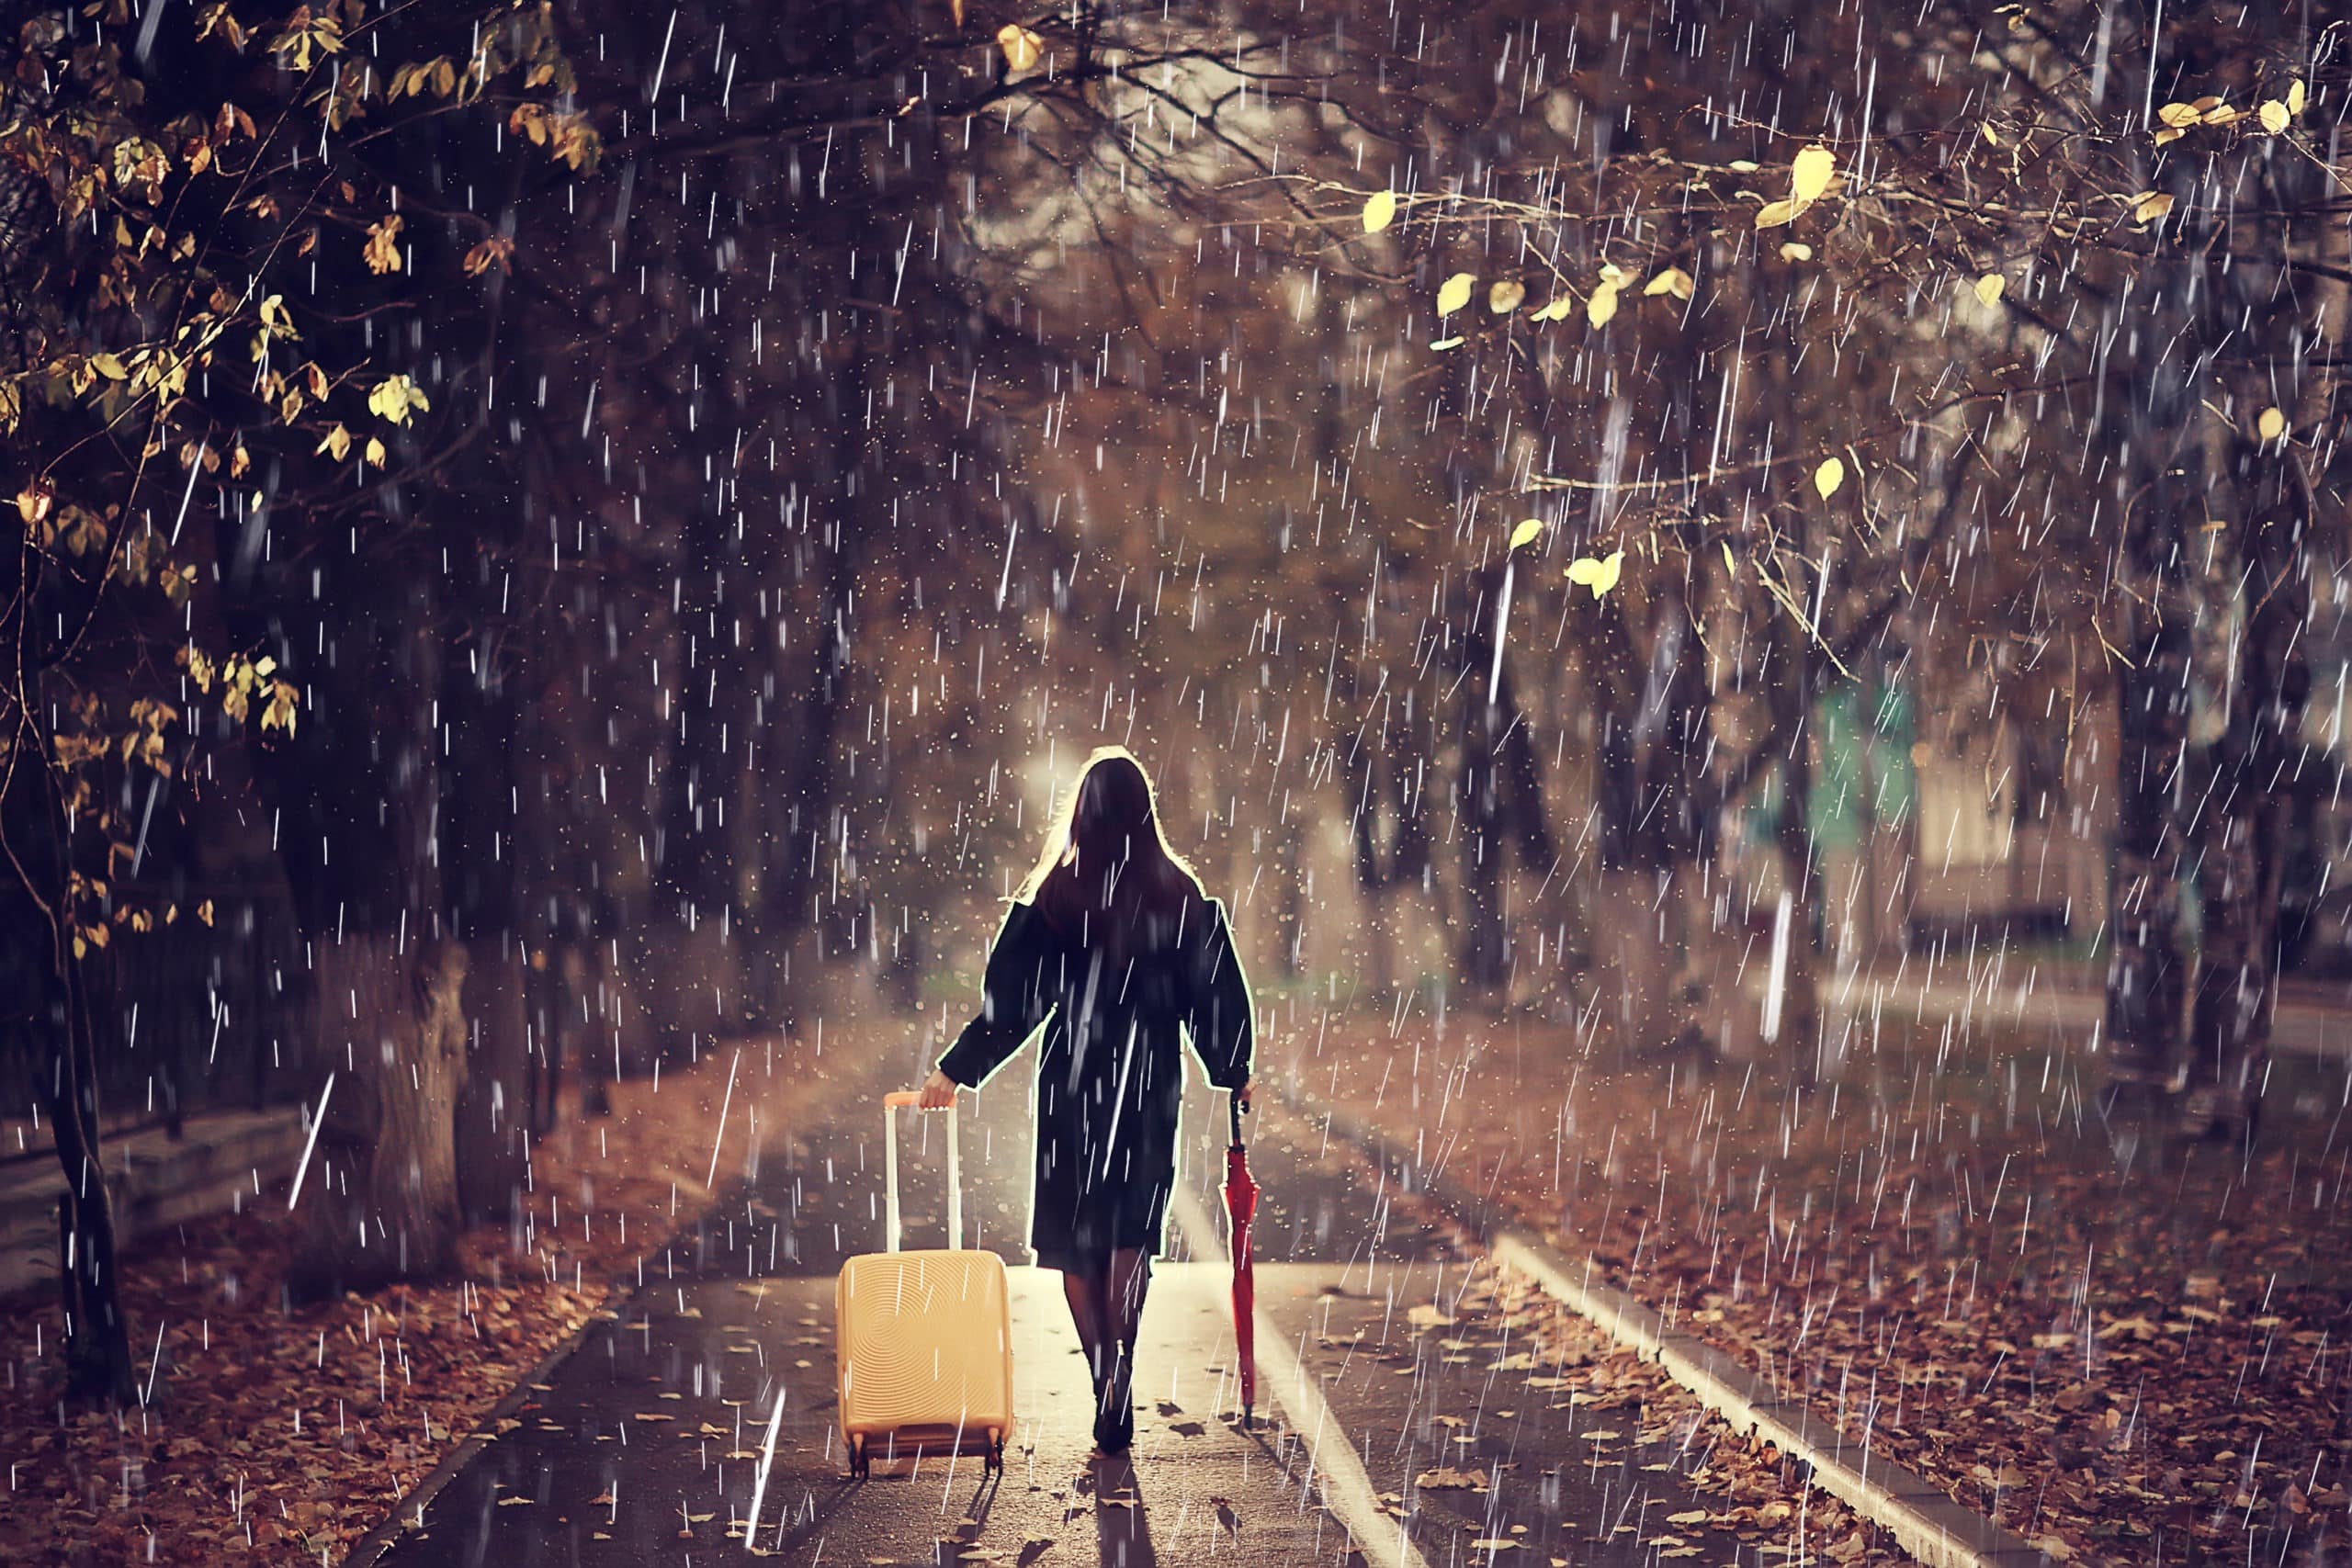 Woman is walking alone with an umbrella and a suitcase in the rain at night